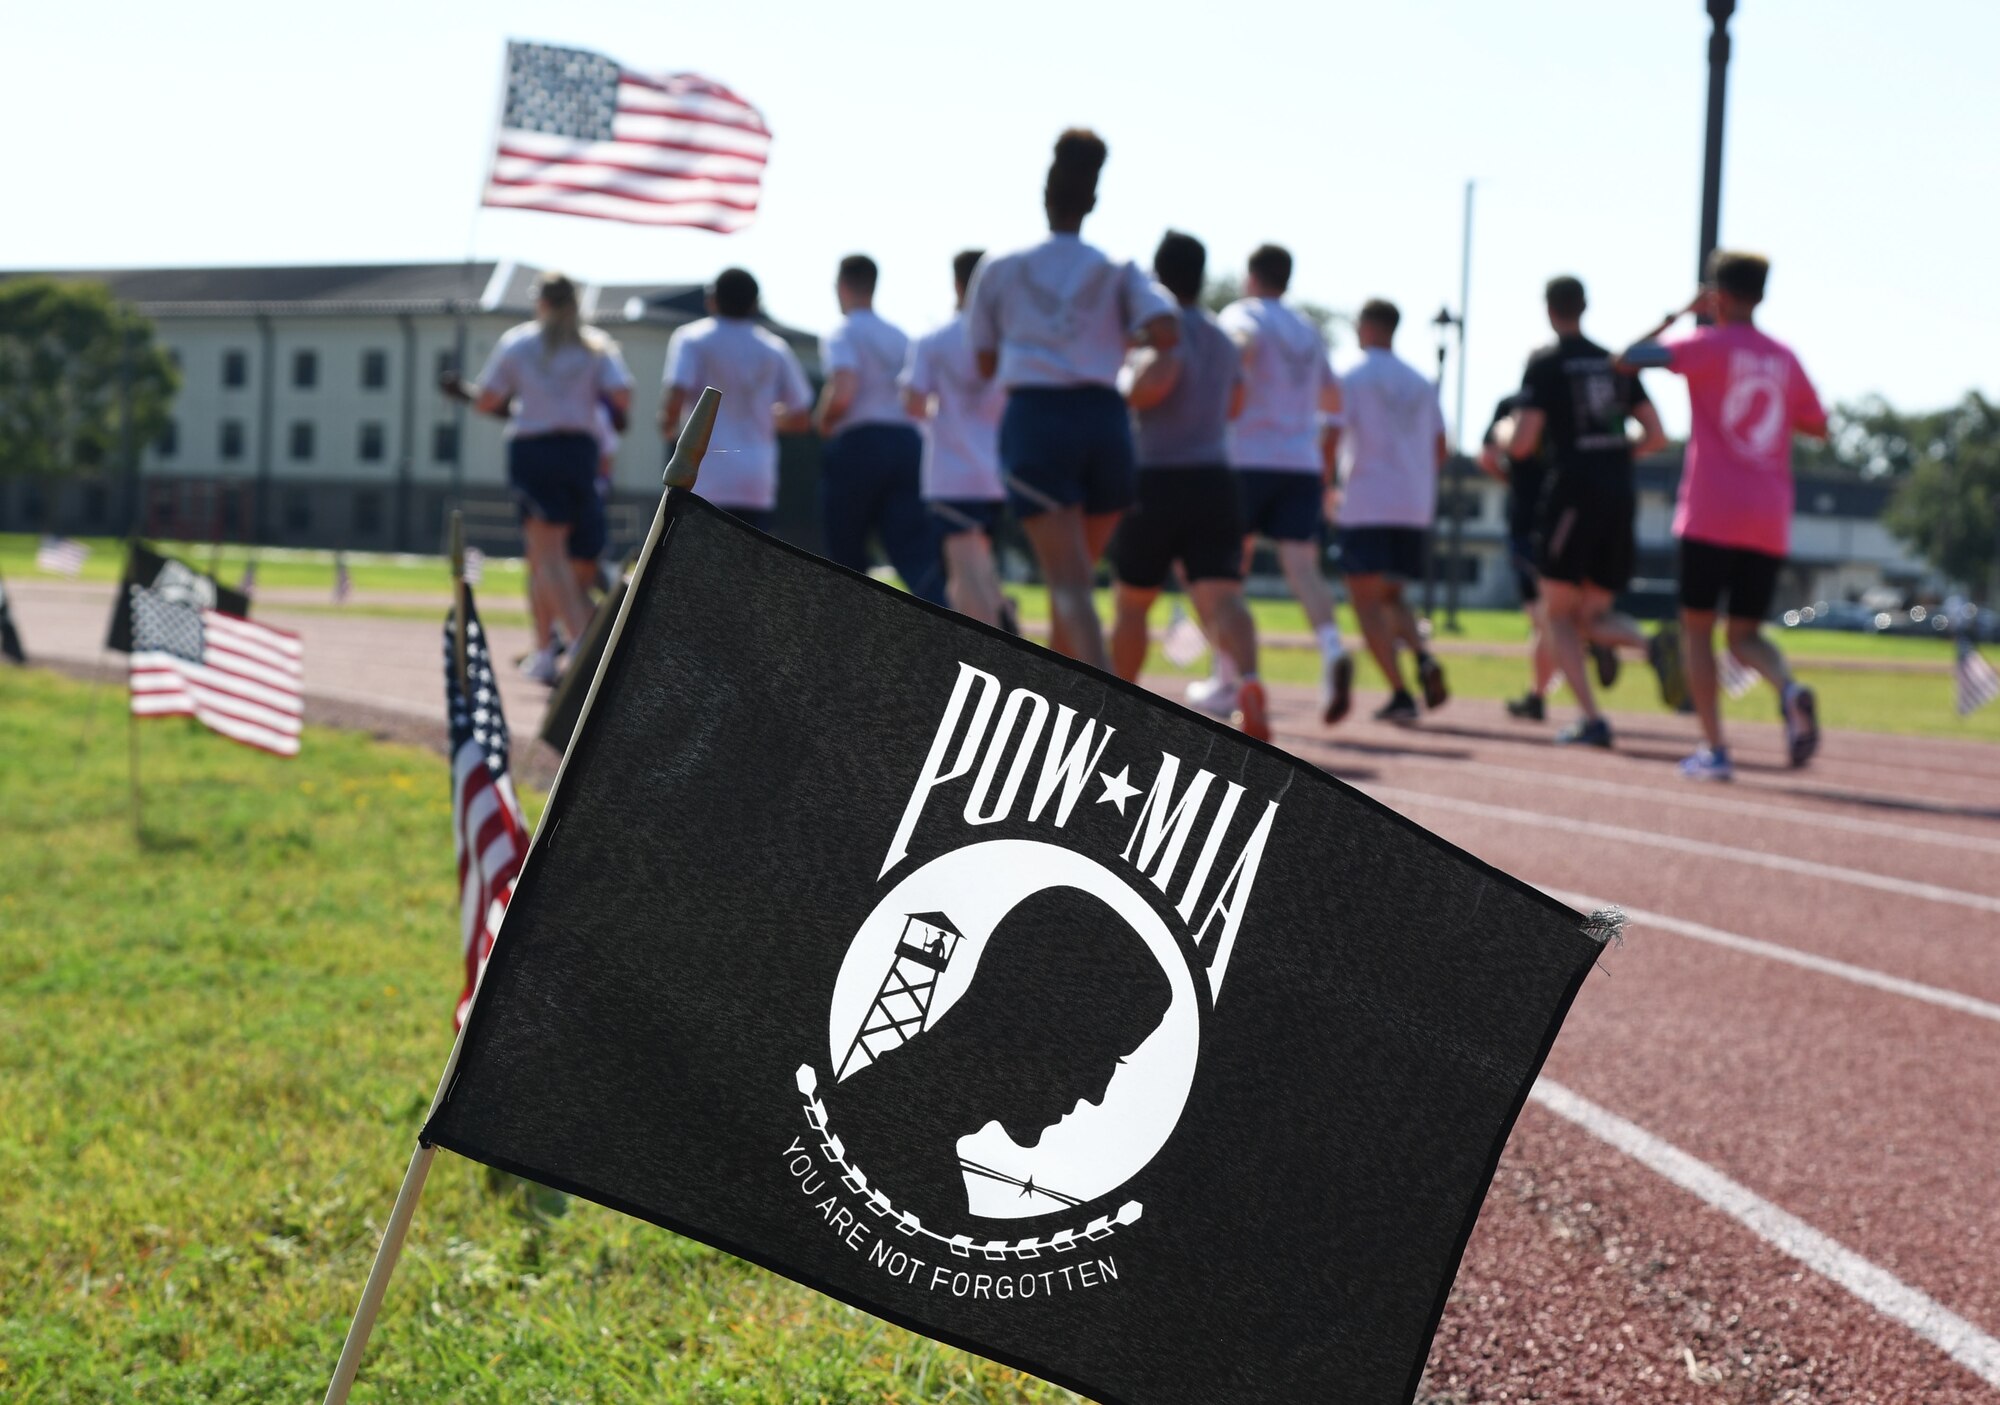 Keesler personnel participate in the POW/MIA run and vigil at the triangle track on Keesler Air Force Base, Mississippi, Sept. 16, 2022. The event, hosted by the Air Force Sergeants Association Chapter 652, is held annually to raise awareness and pay tribute to all prisoners of war and the military members still missing in action. (U.S. Air Force photo by Kemberly Groue)